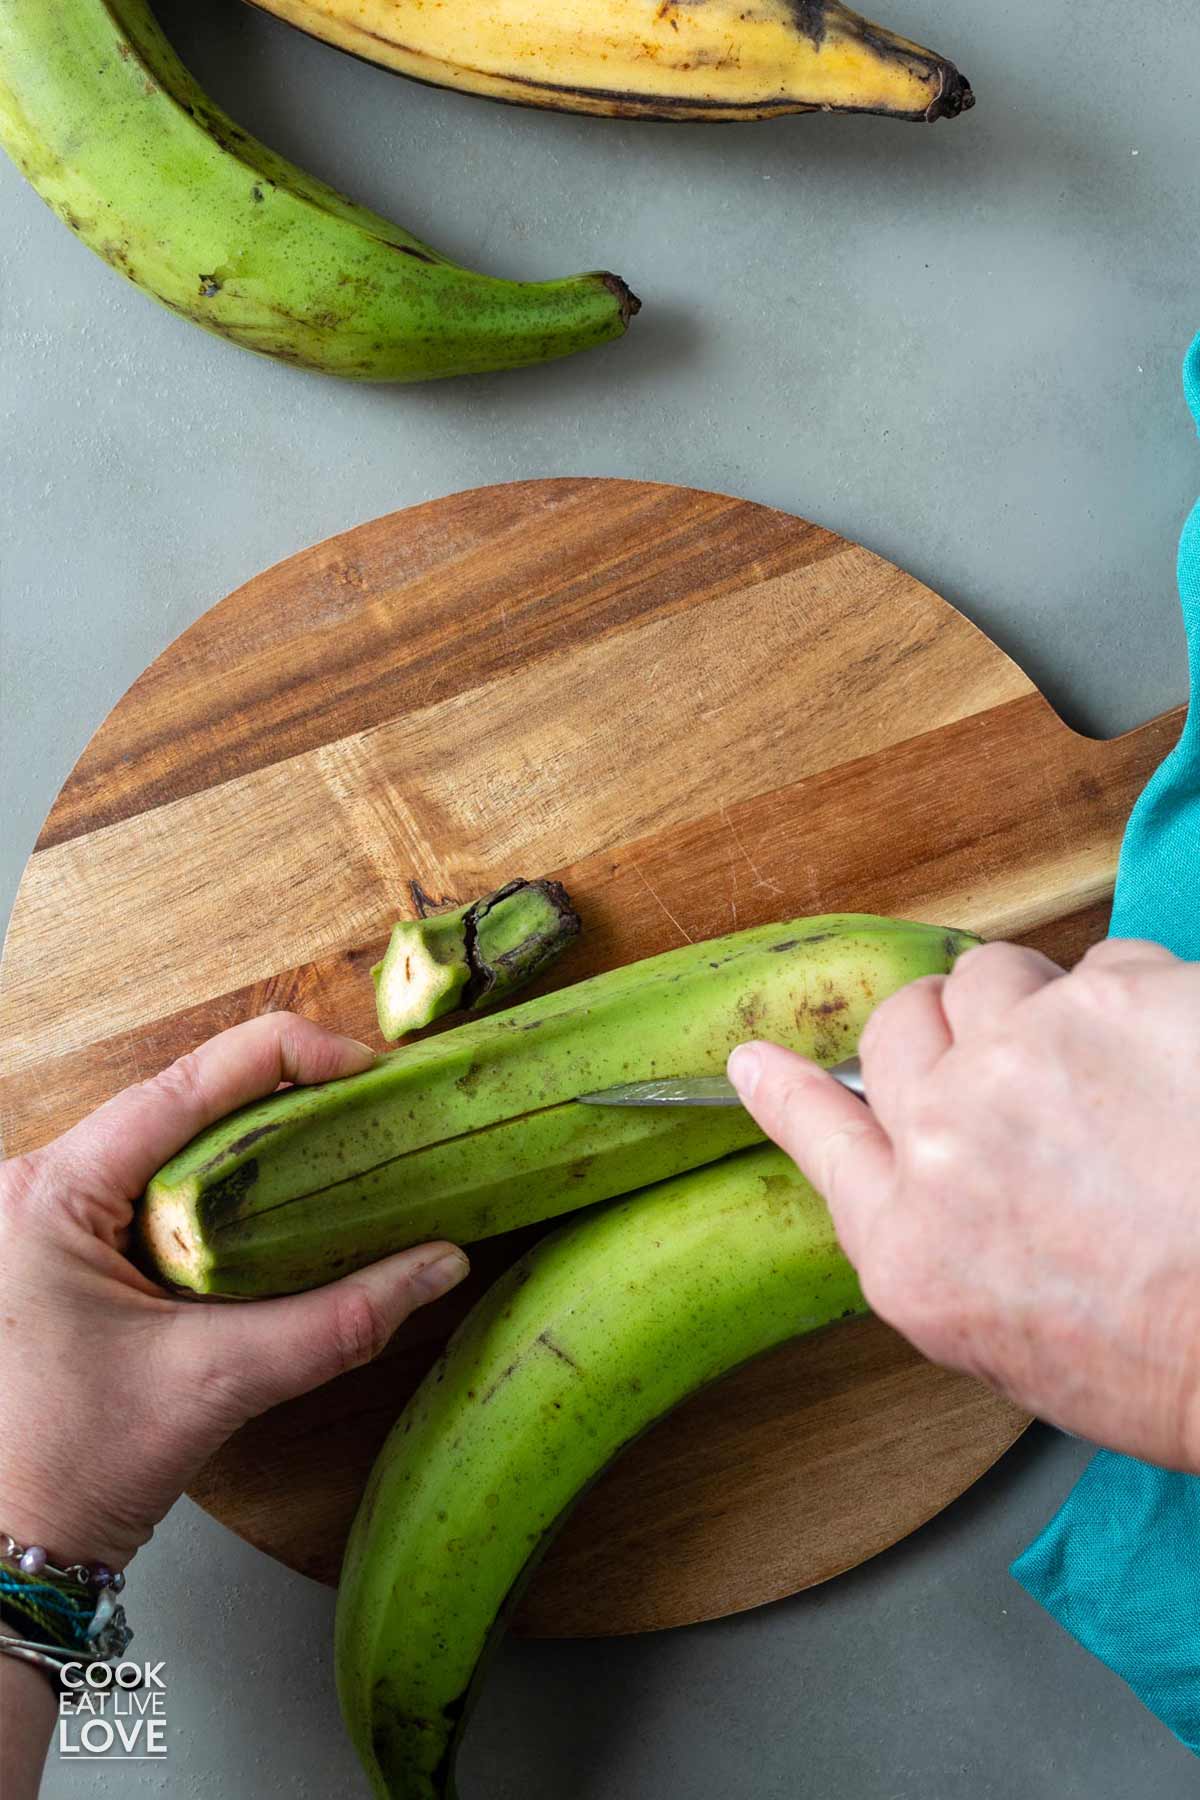 Cutting a slit in the peel of a plantain.